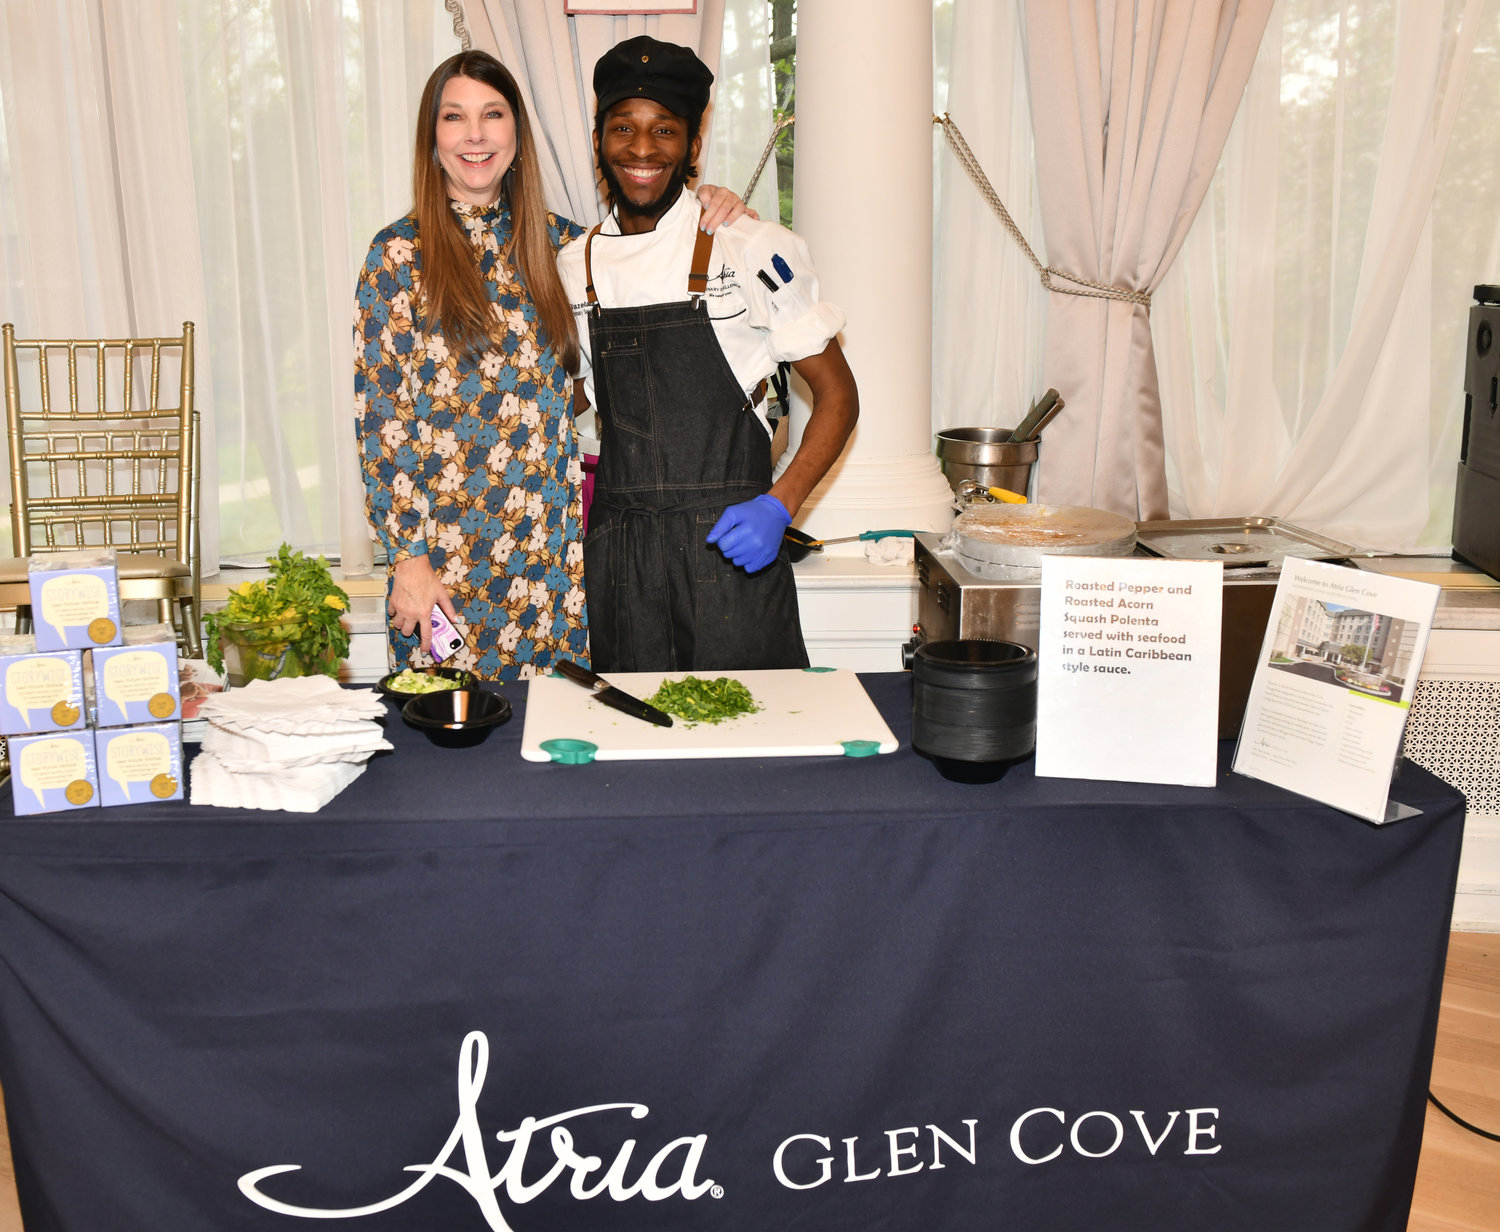 Diane Ziemes, above, with Chef Peter Bazelis of Glen Cove Atria, served up delicious squash polenta and seafood.